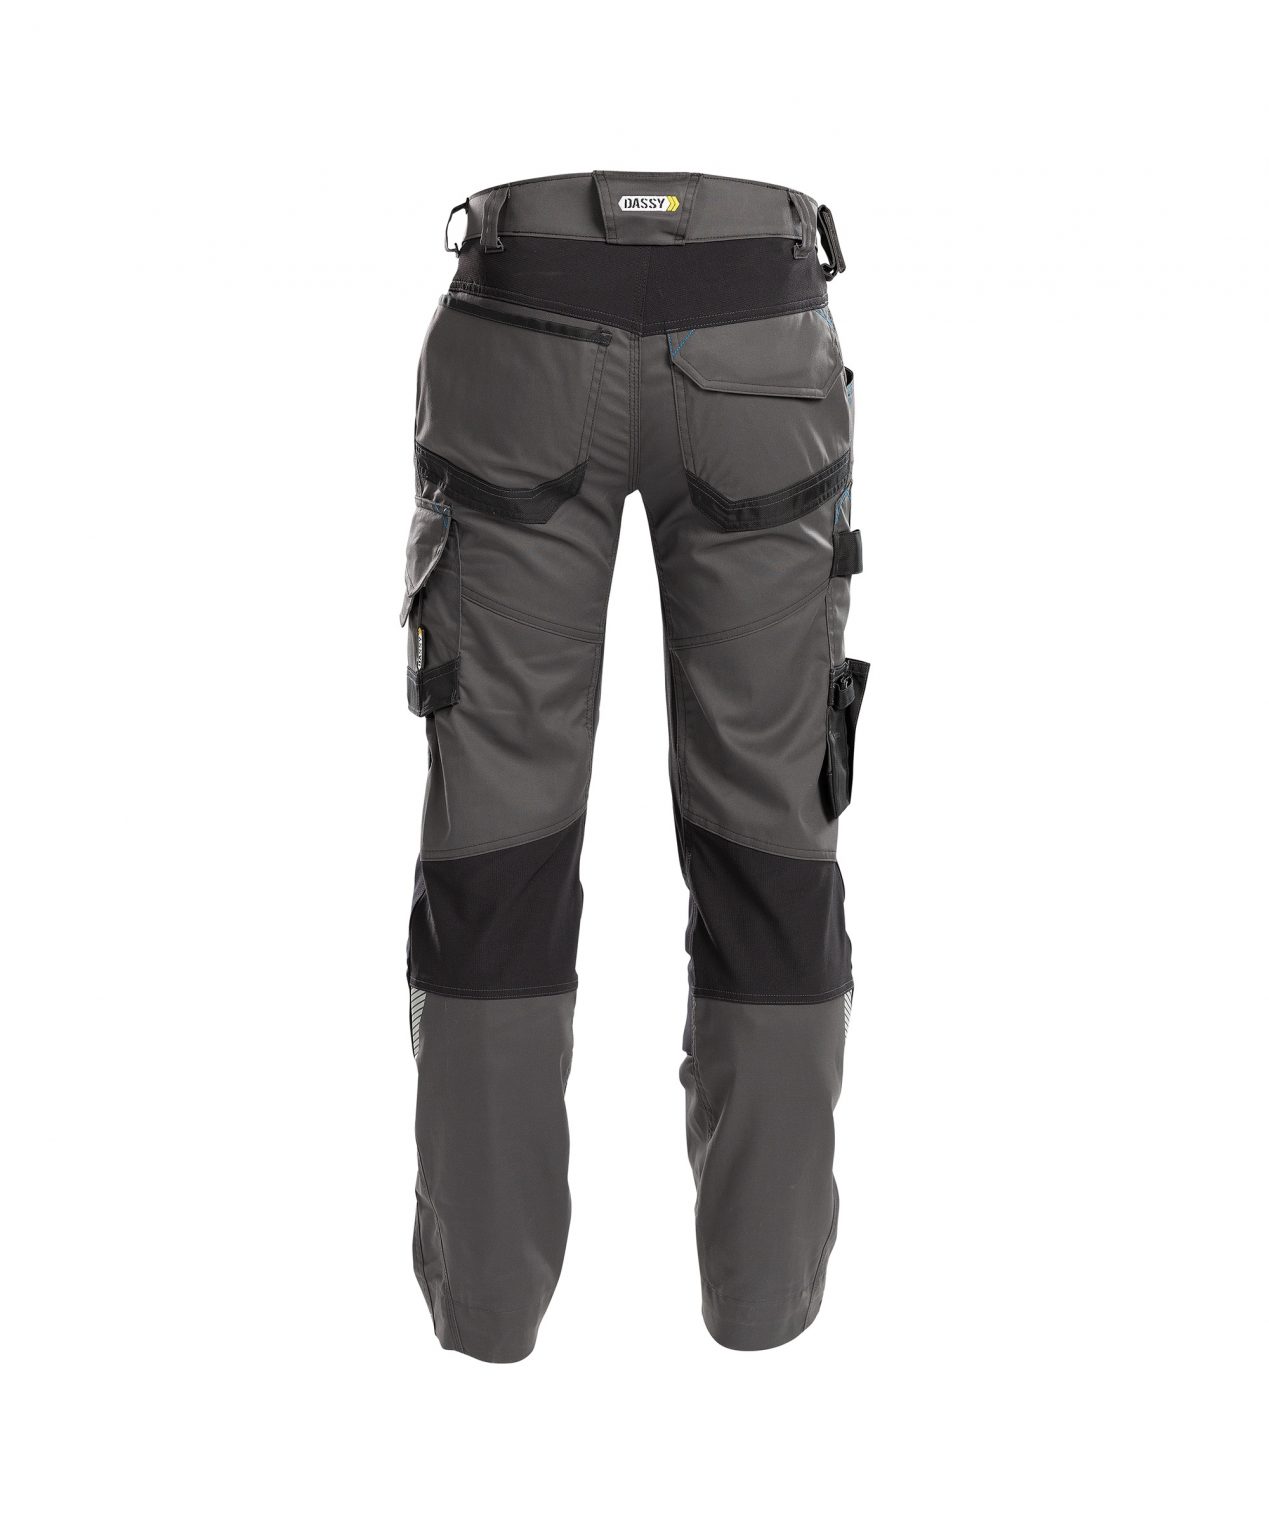 dynax work trousers with stretch and knee pockets anthracite grey black back